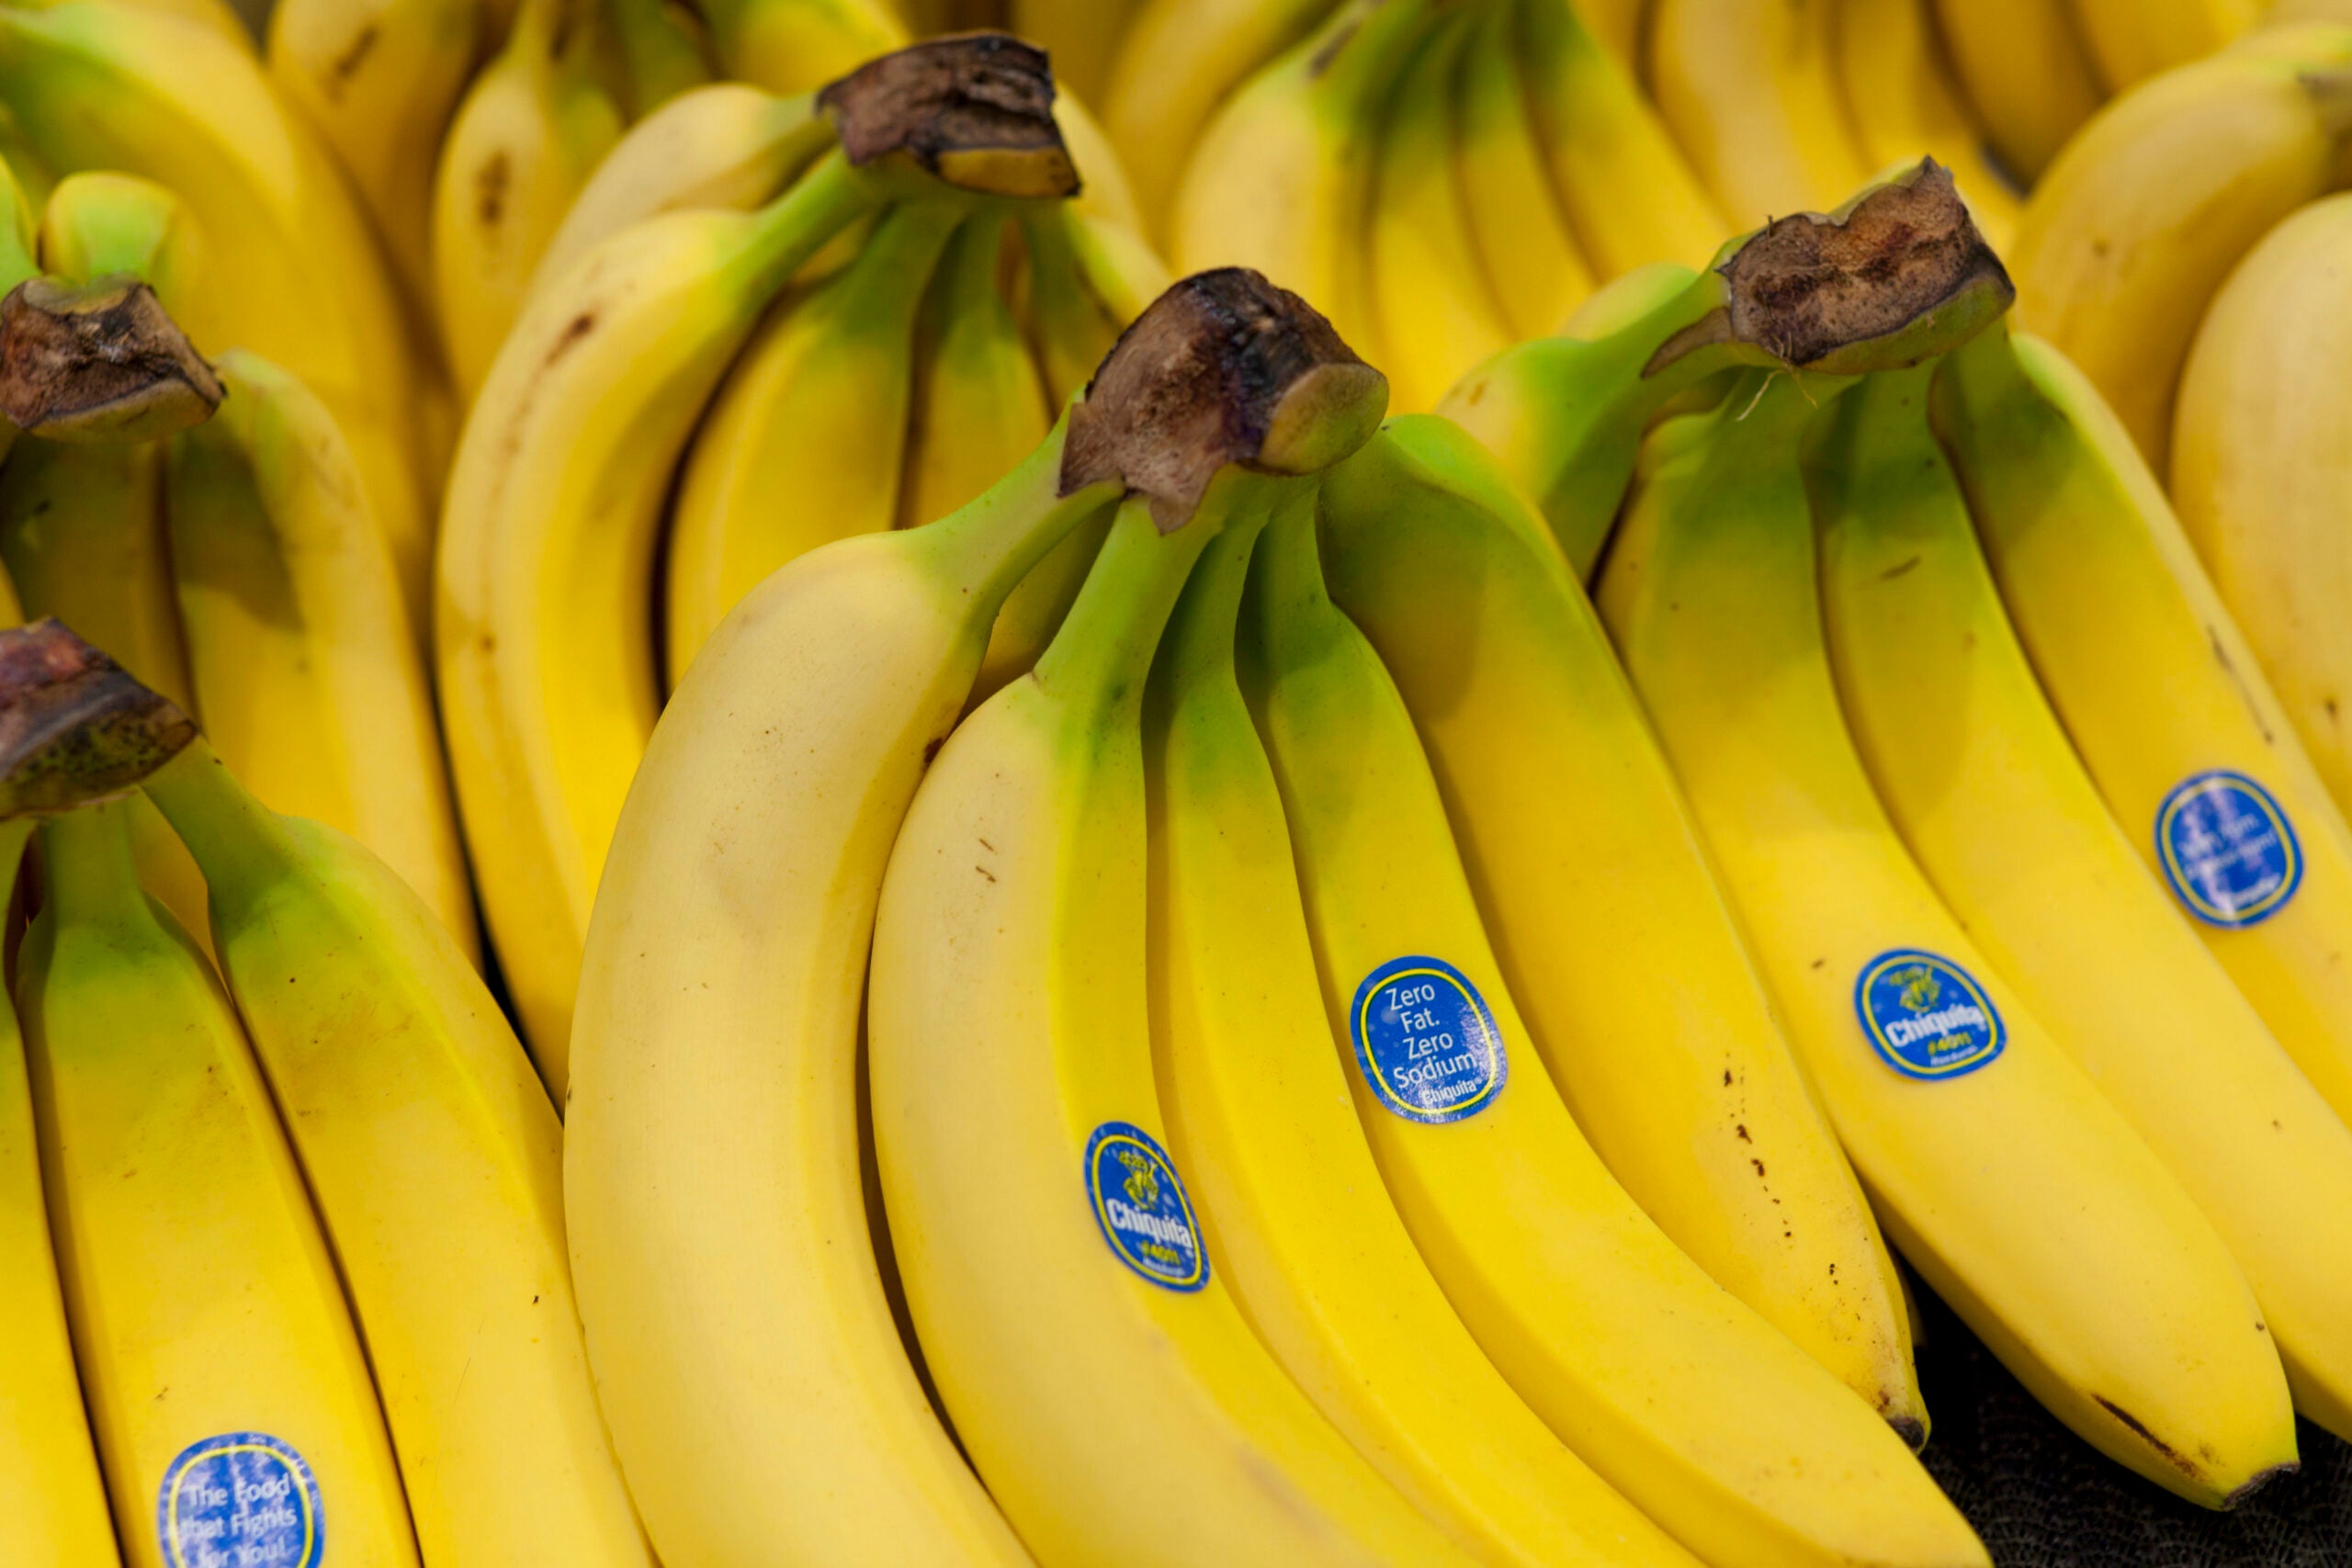 Chiquita bananas on display in grocery store